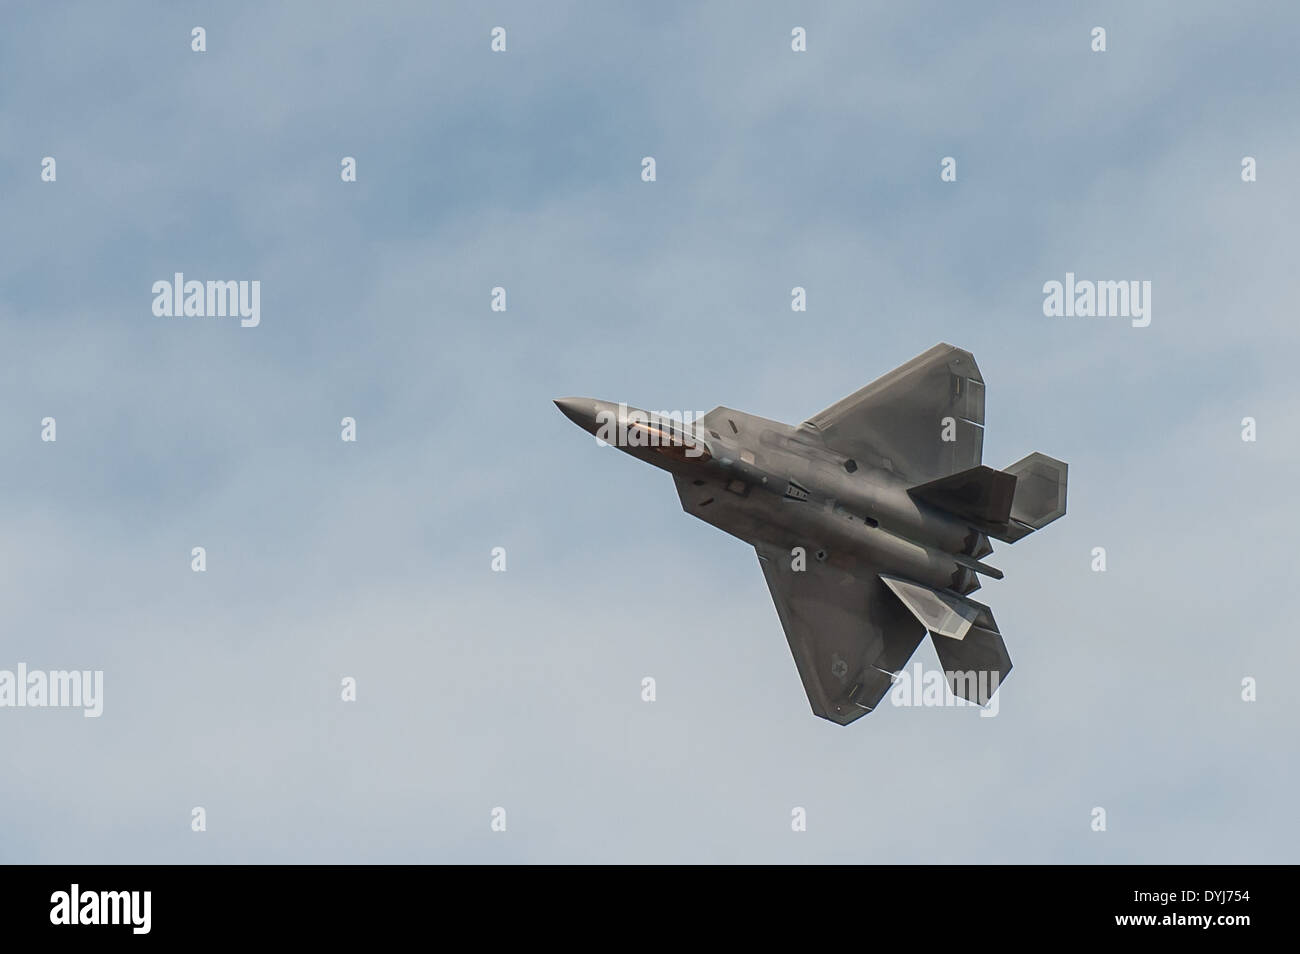 A US Air Force F-22 Raptor stealth fighter aircraft practices an aerial demonstration routine over the Ohio River April 10, 2014 in Louisville, Ky. Stock Photo